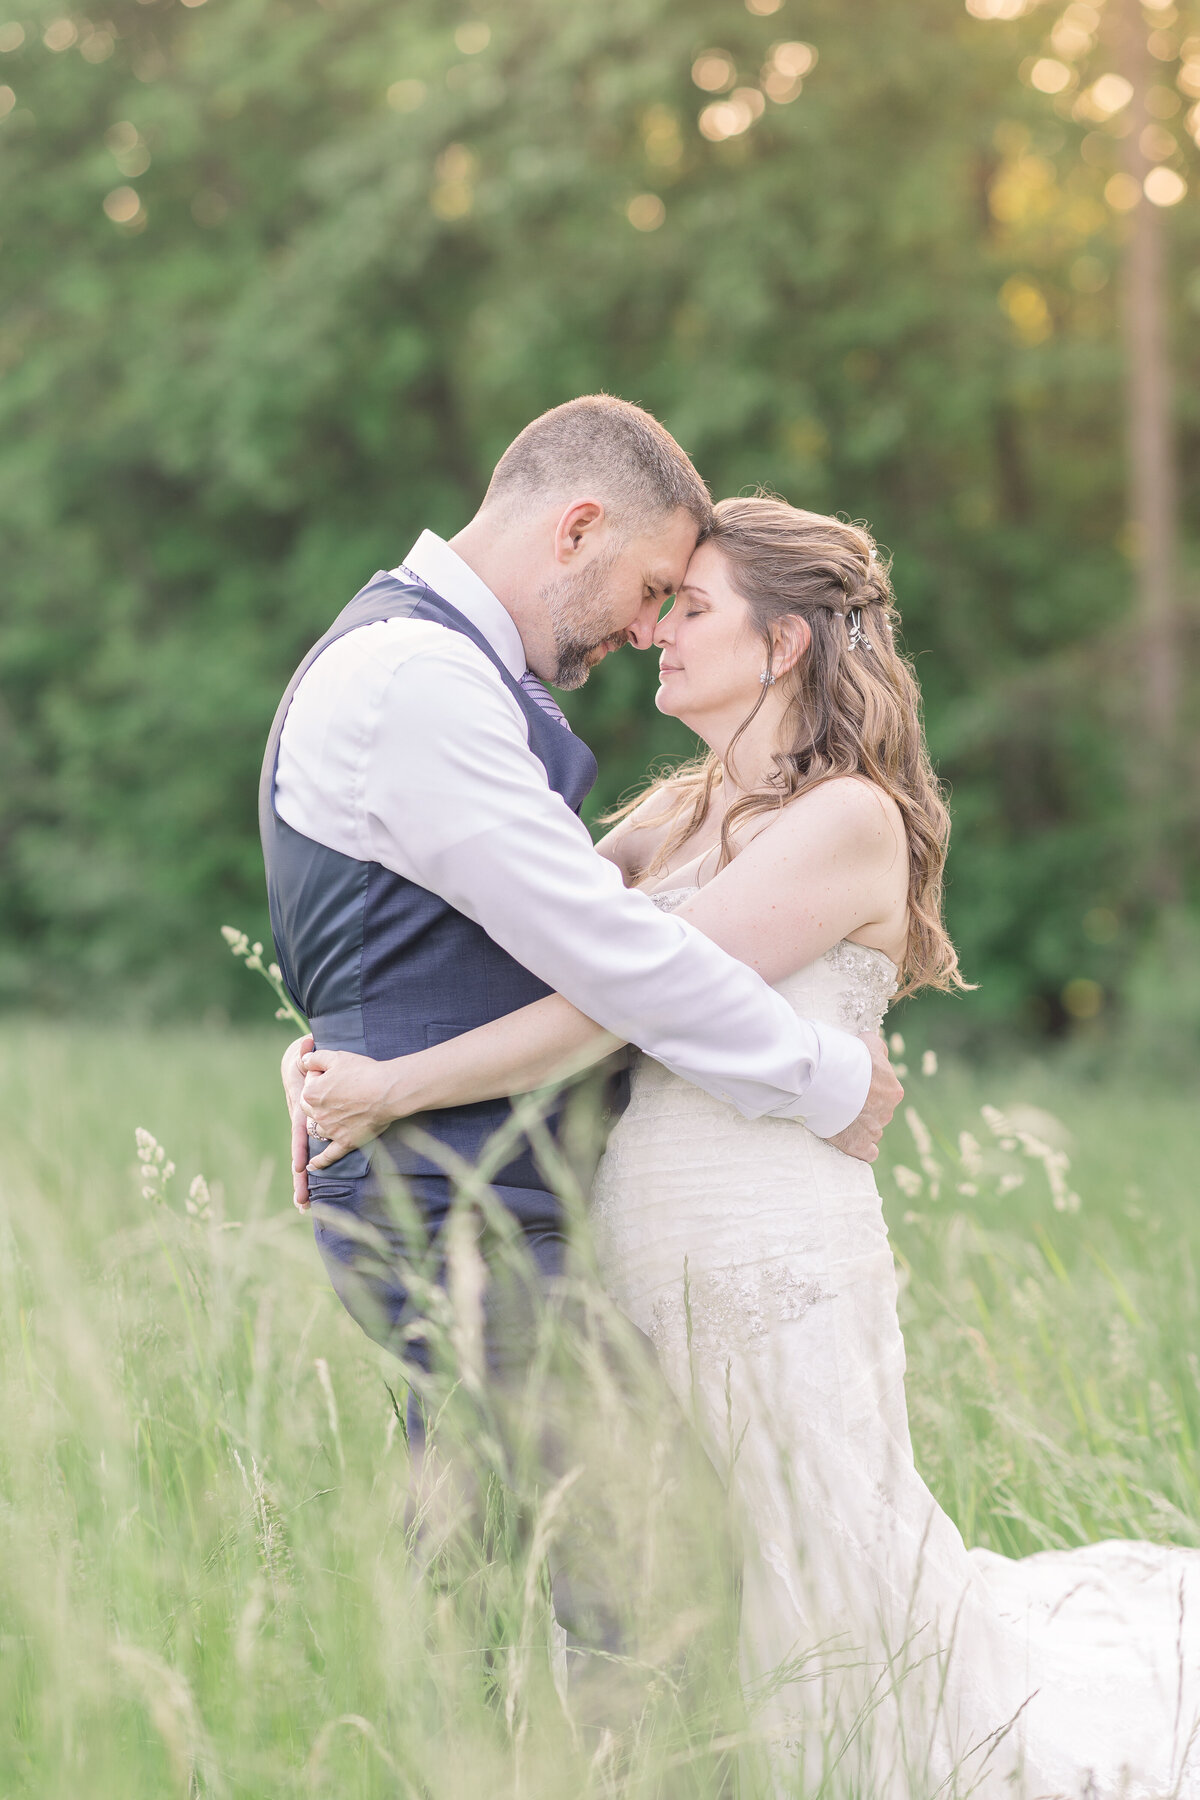 Frozen Moments by Kathy Photography |  Couple in field